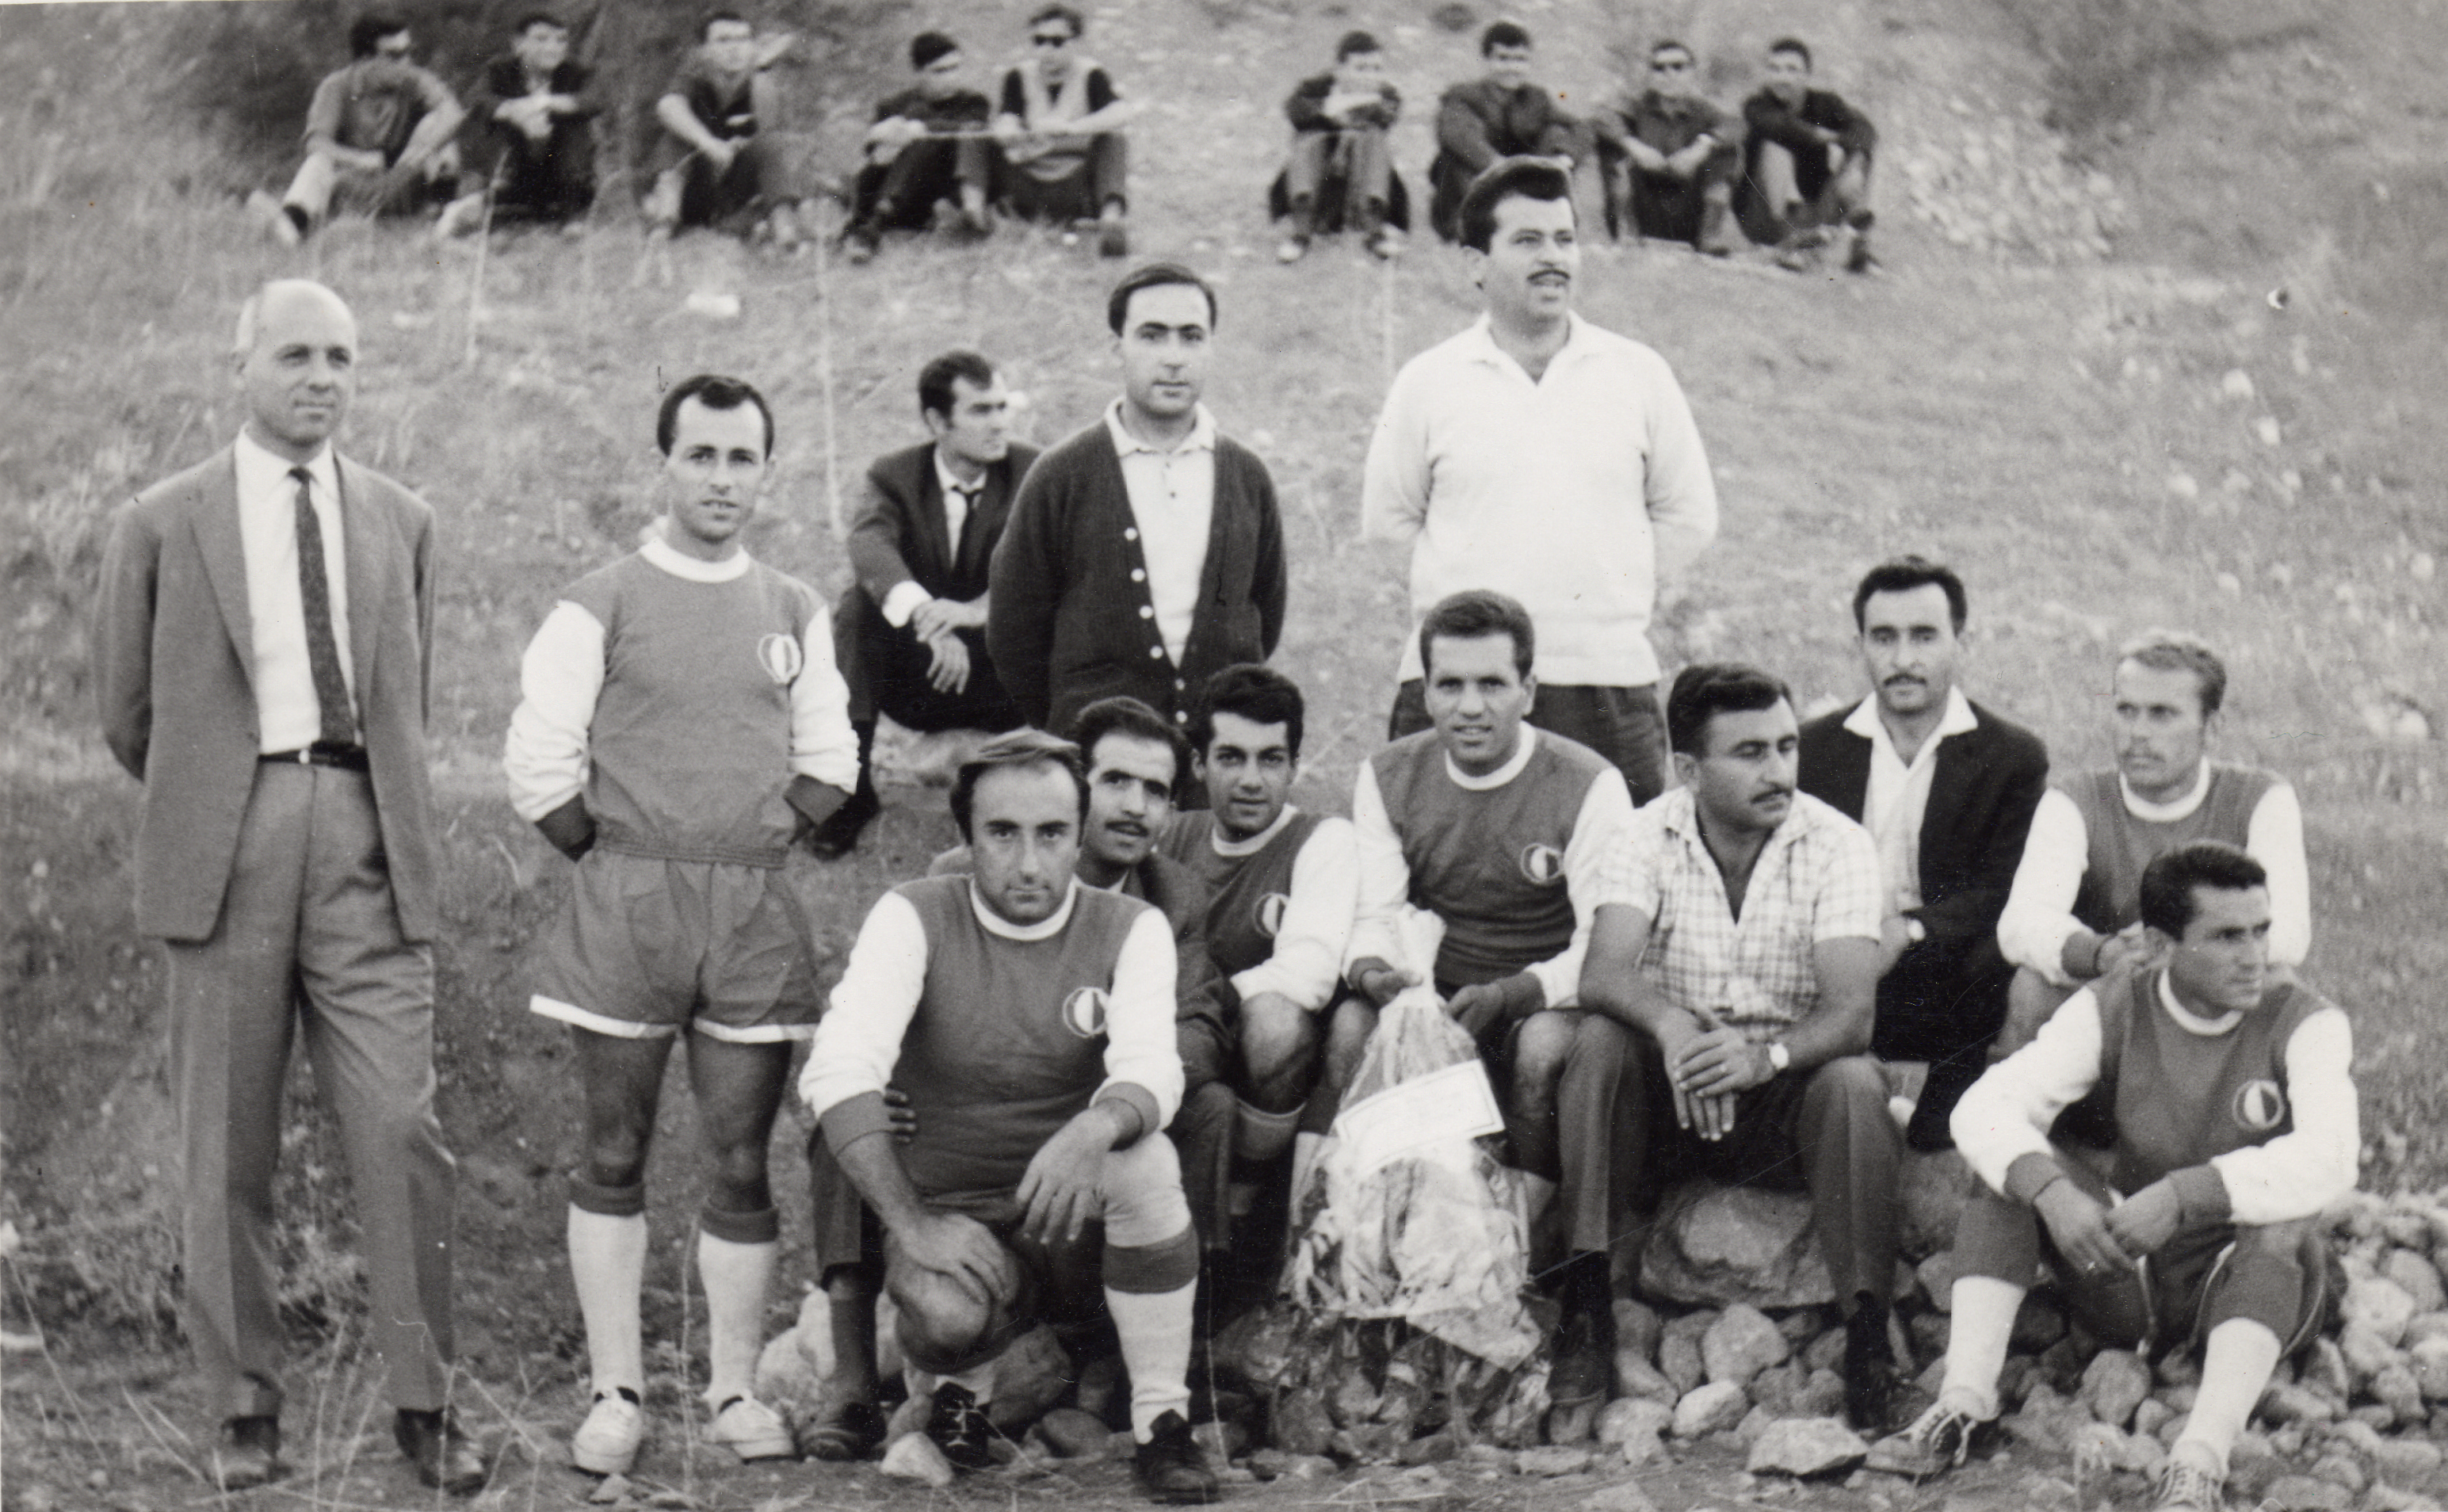 Group photo before the match at the opening ceremony of the football field